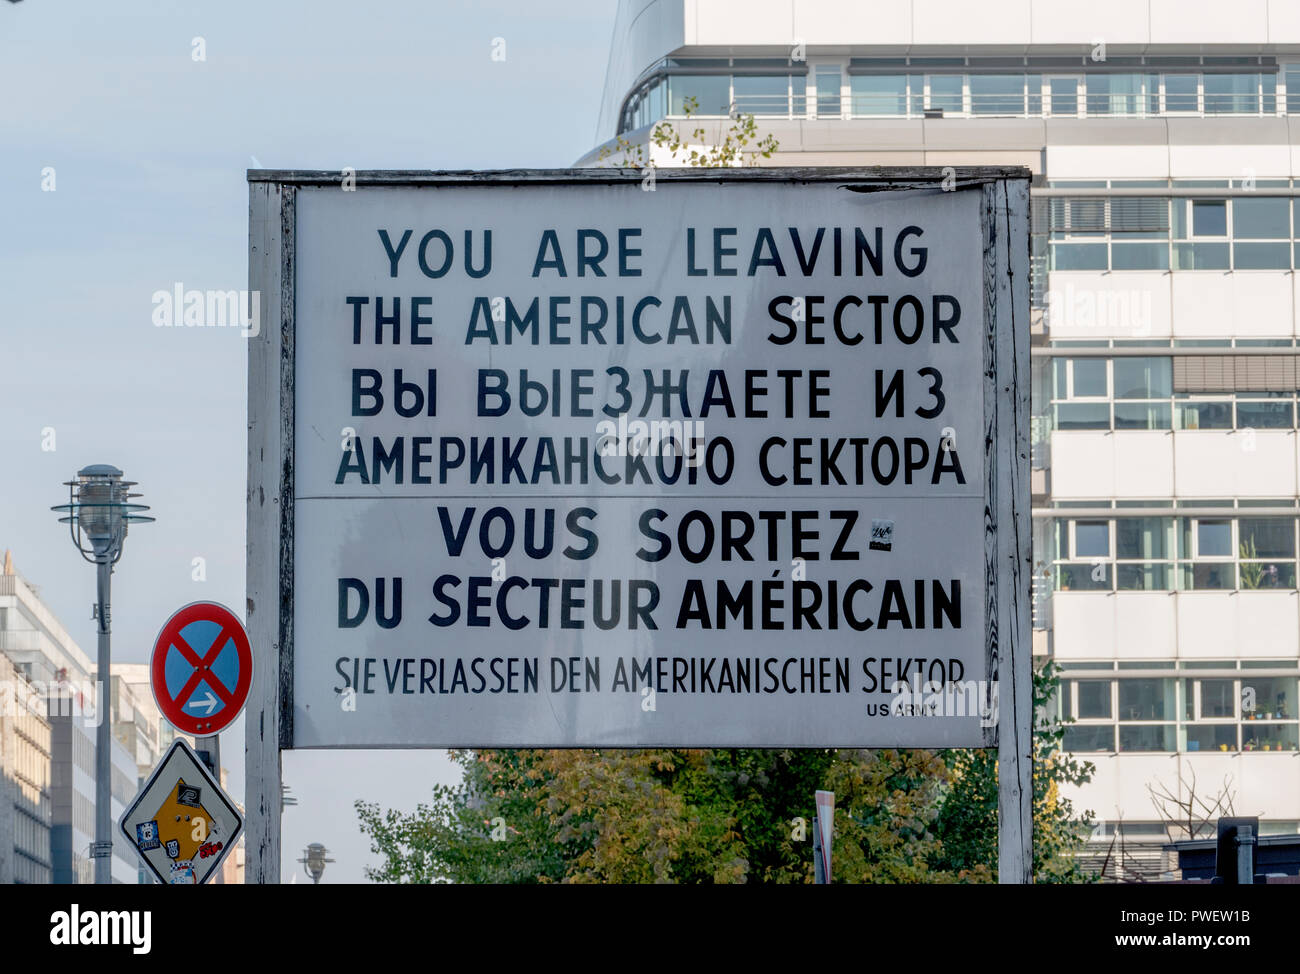 An American signpost at Checkpoint Charlie, Berlin, Germany. A remnant from the Berlin Wall which separated East and West Germany in Berlin. Stock Photo